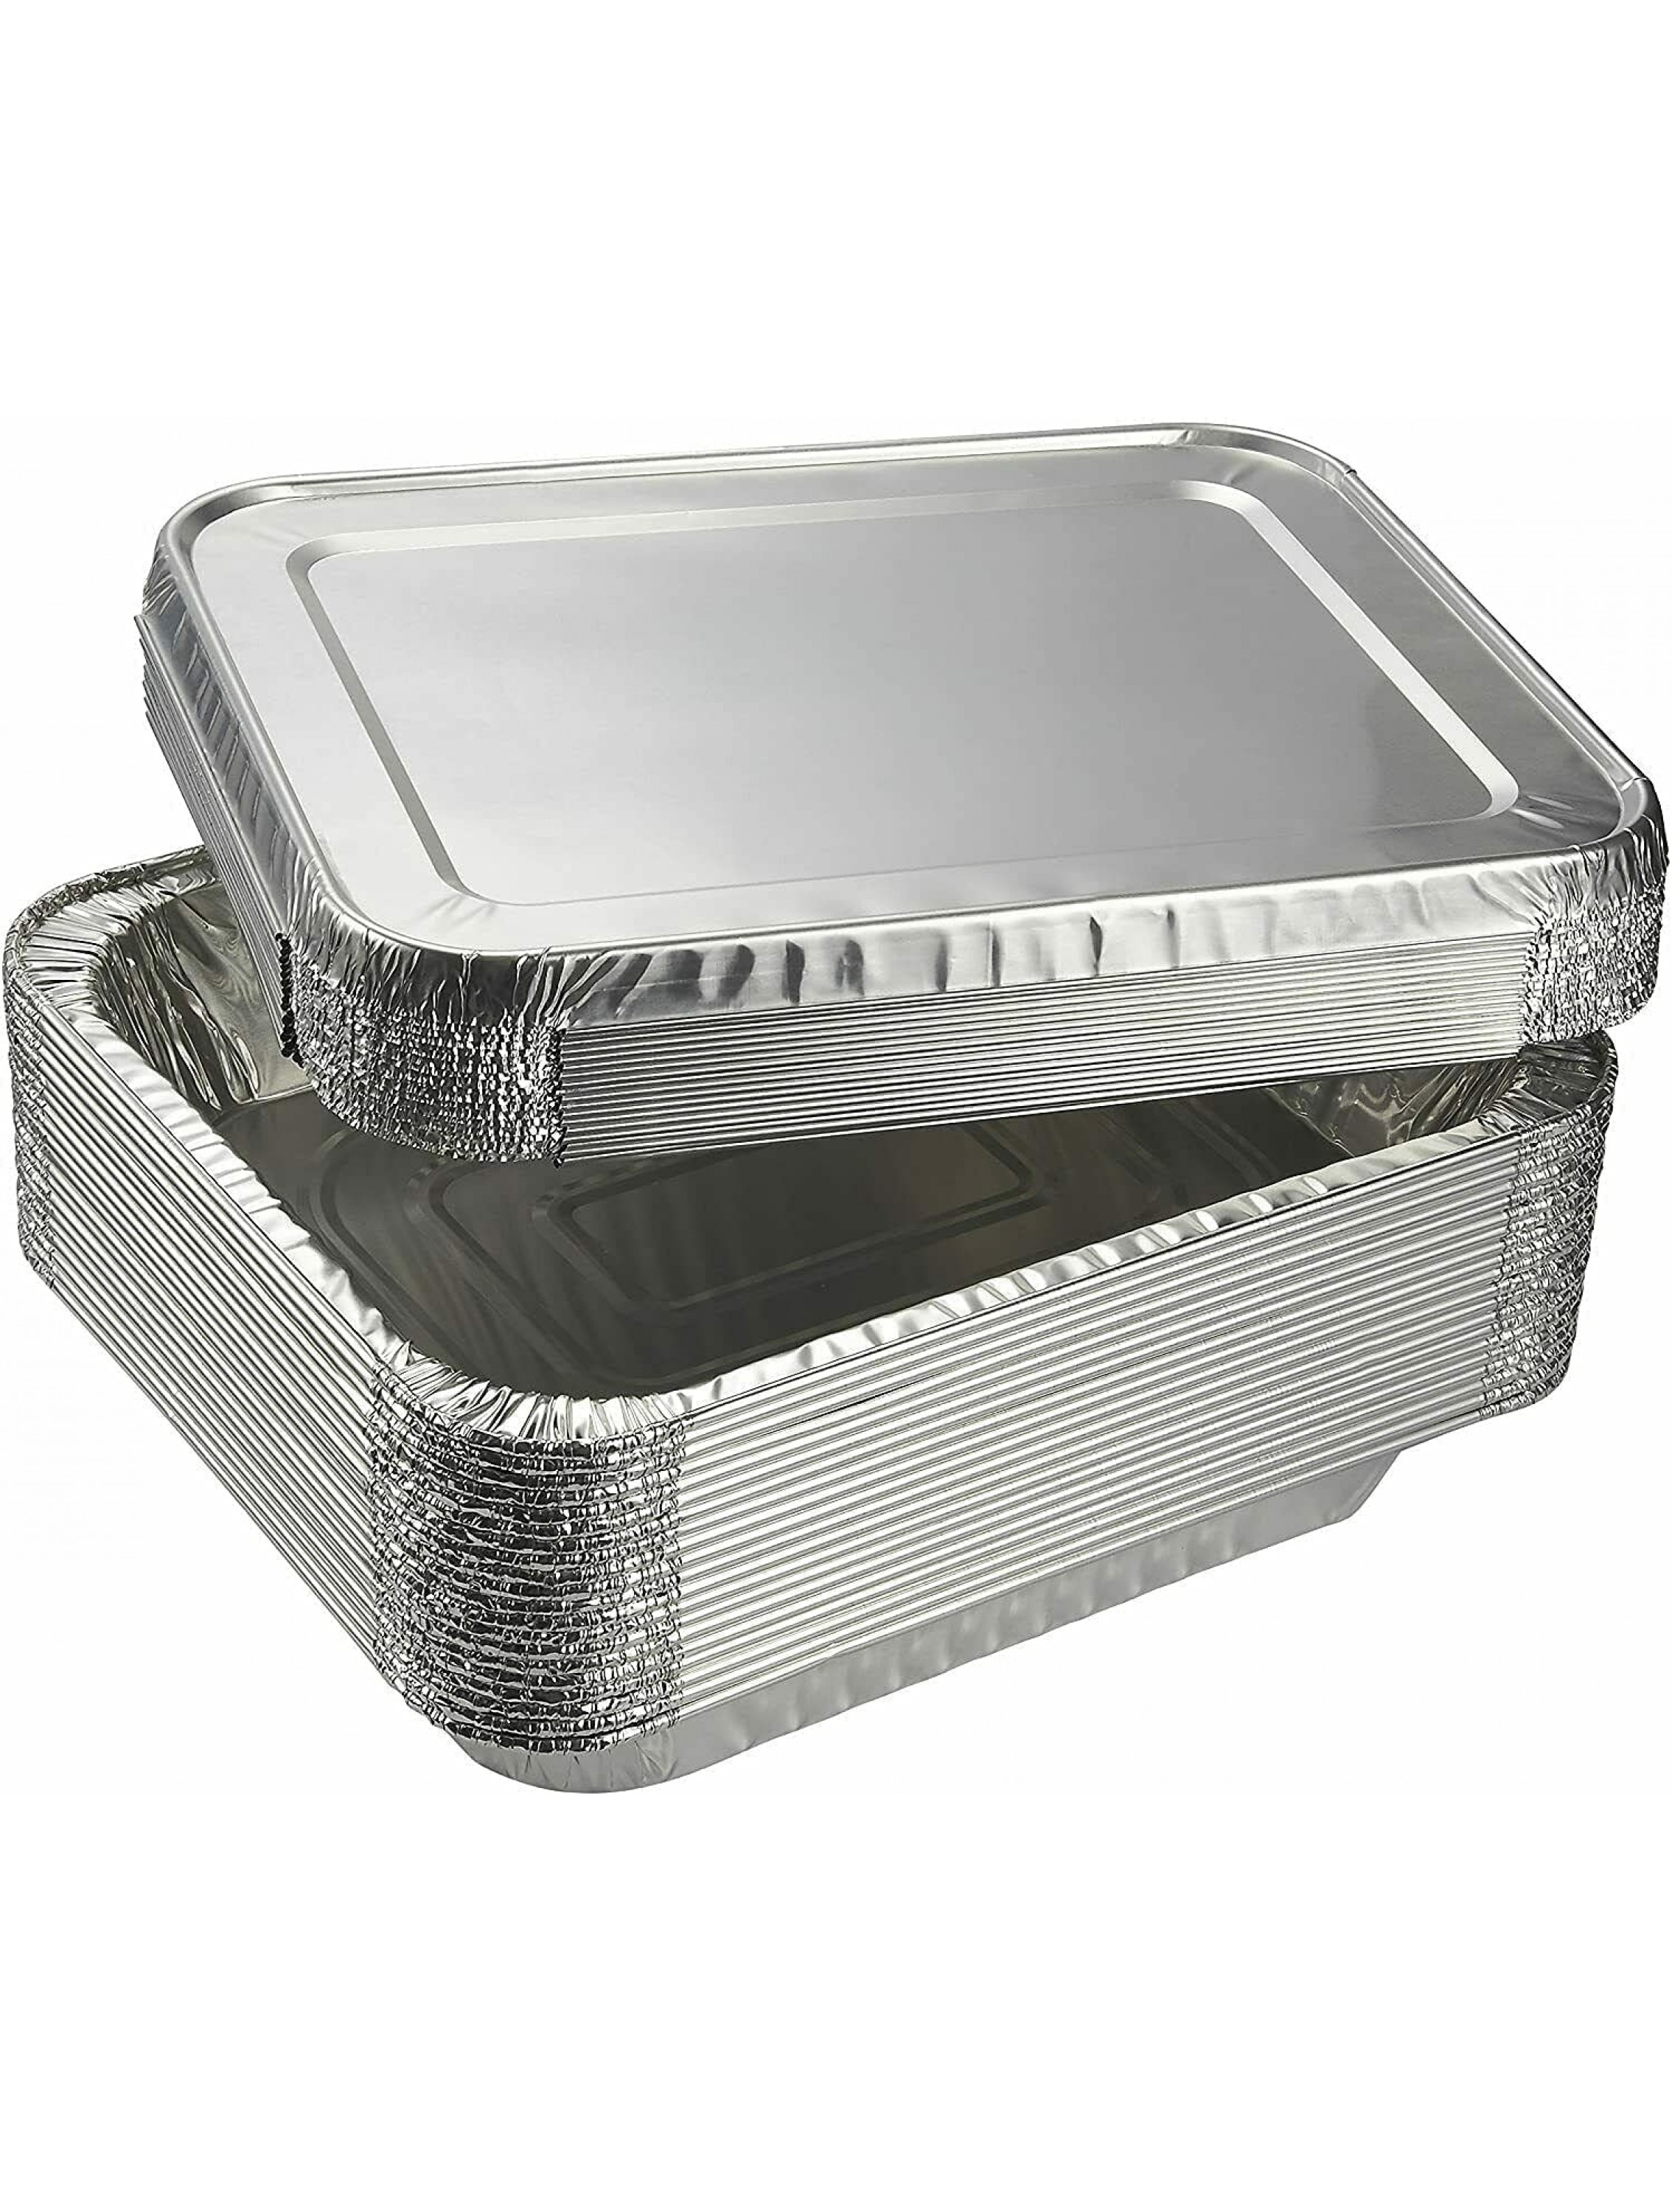 Half Size Aluminum Disposable With Aluminum Lids 9x13 Chafing Pans Perfect Cookware for Cakes Bread & other Food: 5PK - BLN83I8MK